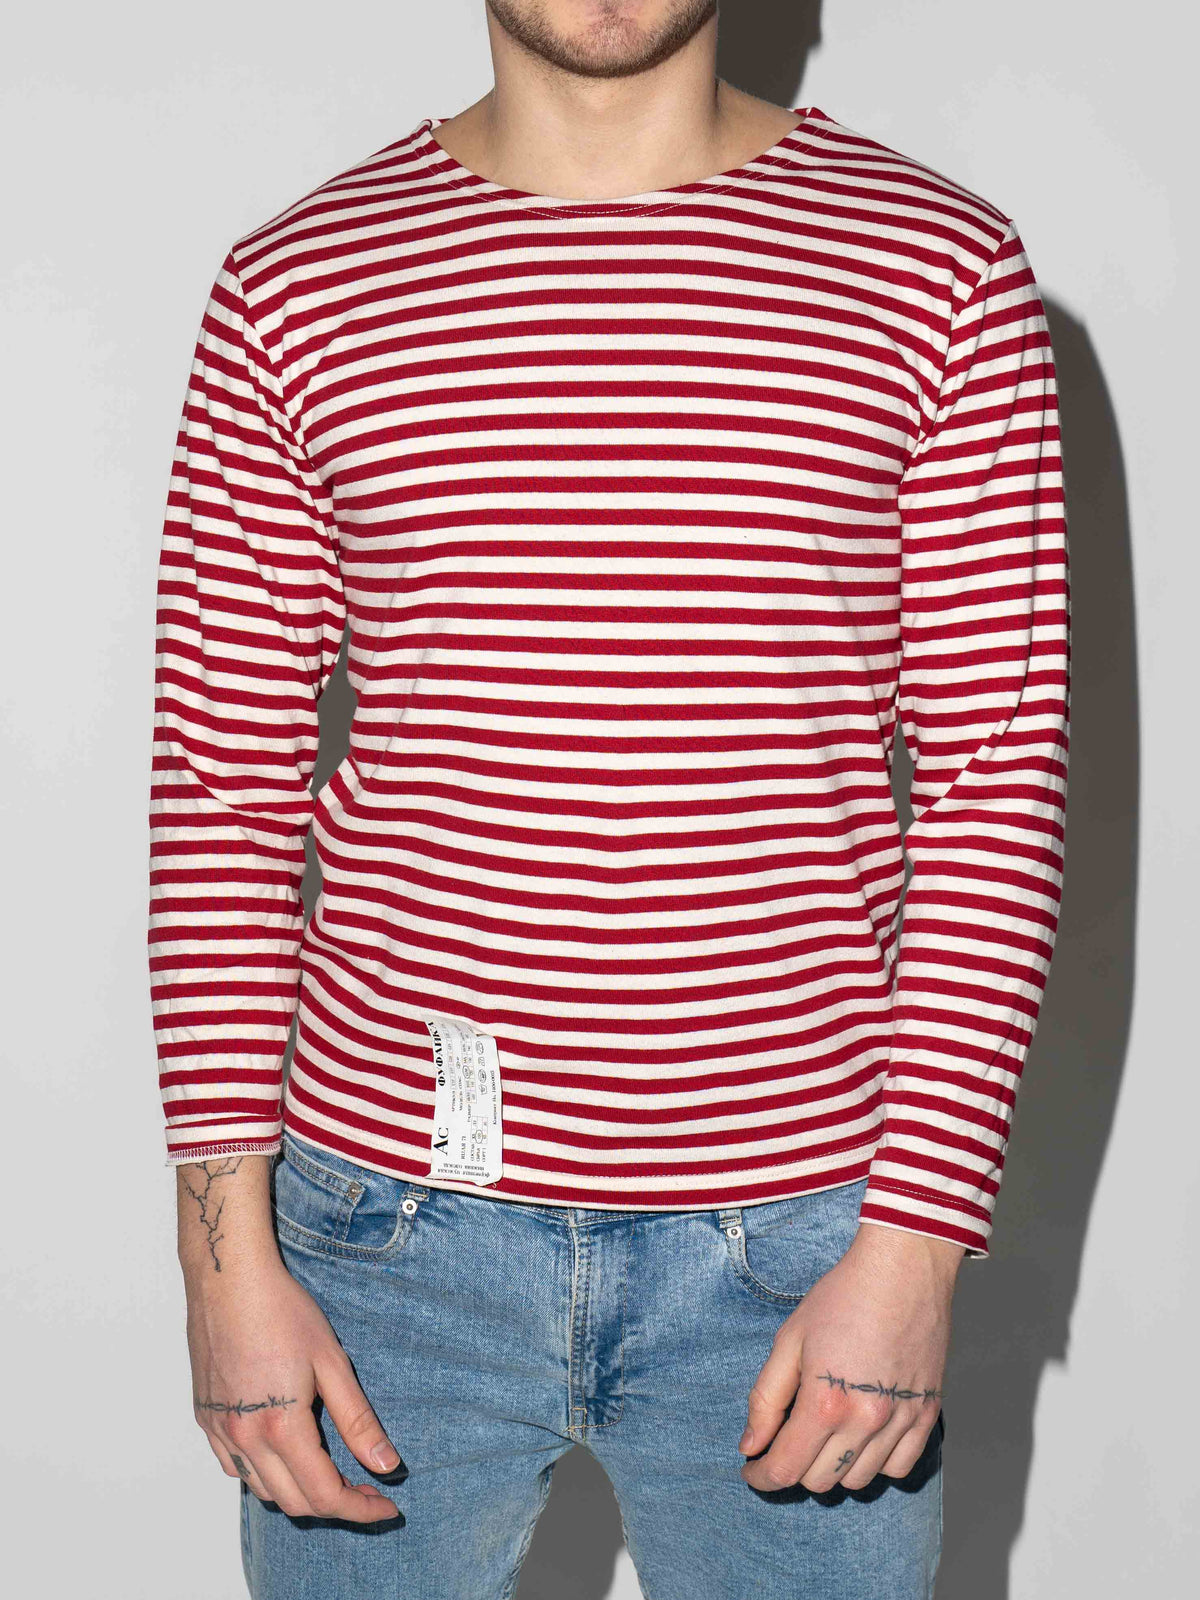 VINTAGE RED STRIPED SWEATER